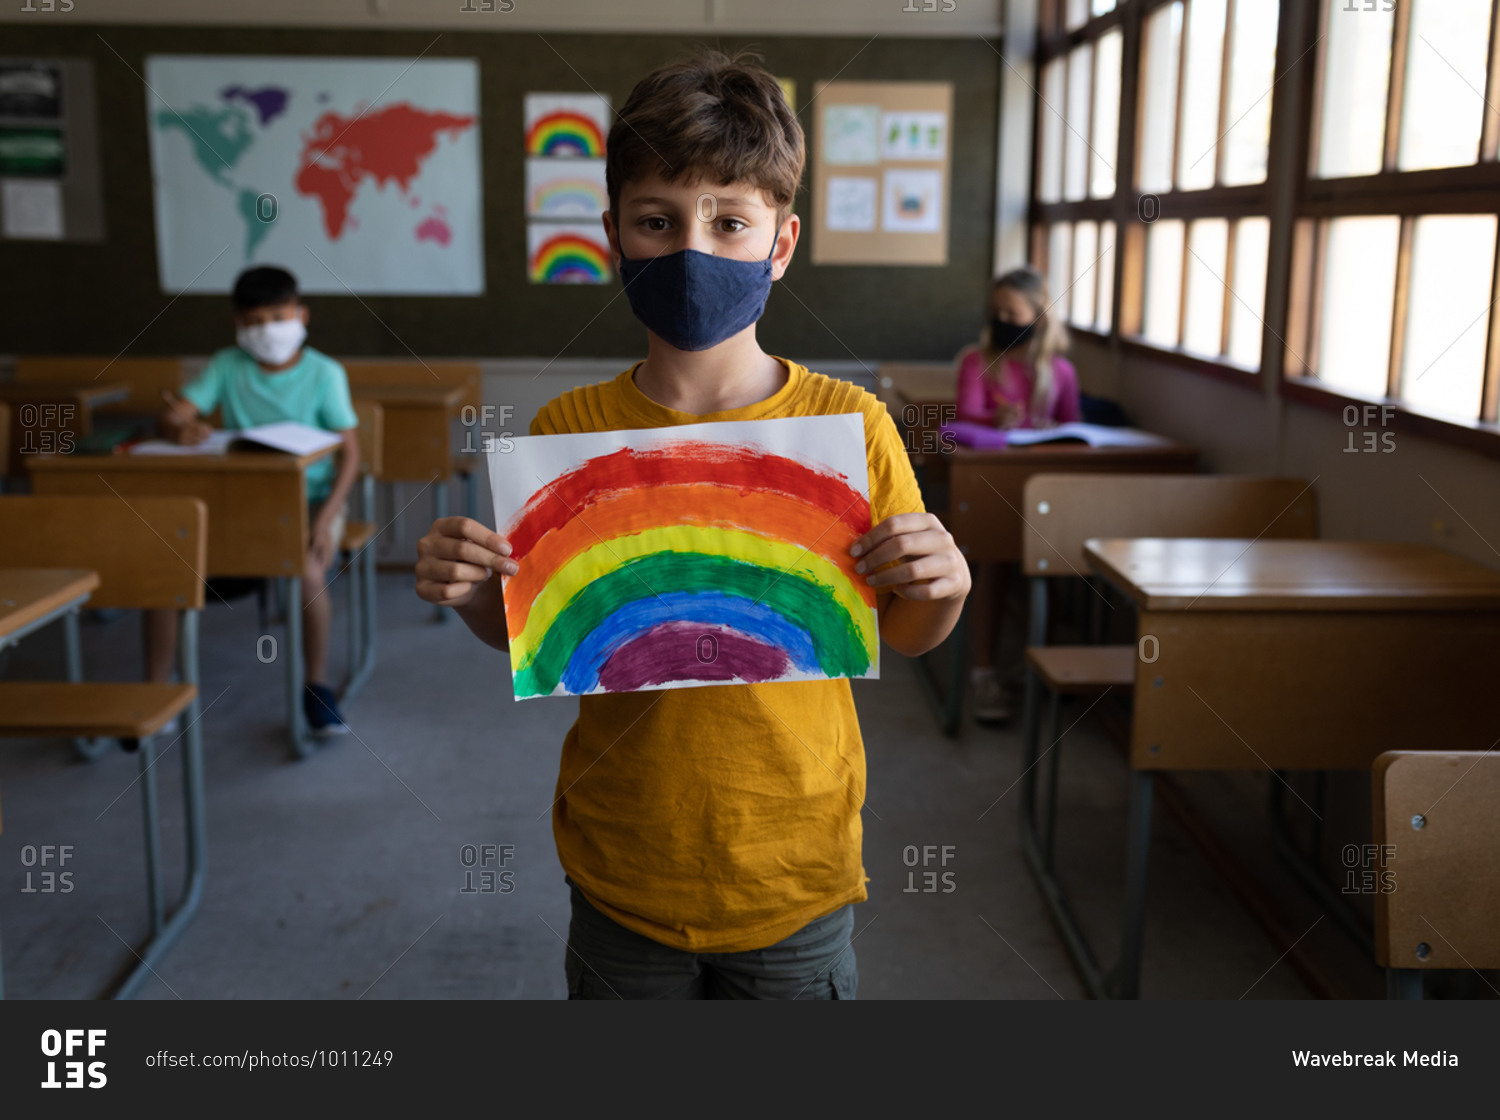 Portrait of a Caucasian boy wearing face mask holding a rainbow drawing in the classroom. Primary education social distancing health safety during Covid19 Coronavirus pandemic.